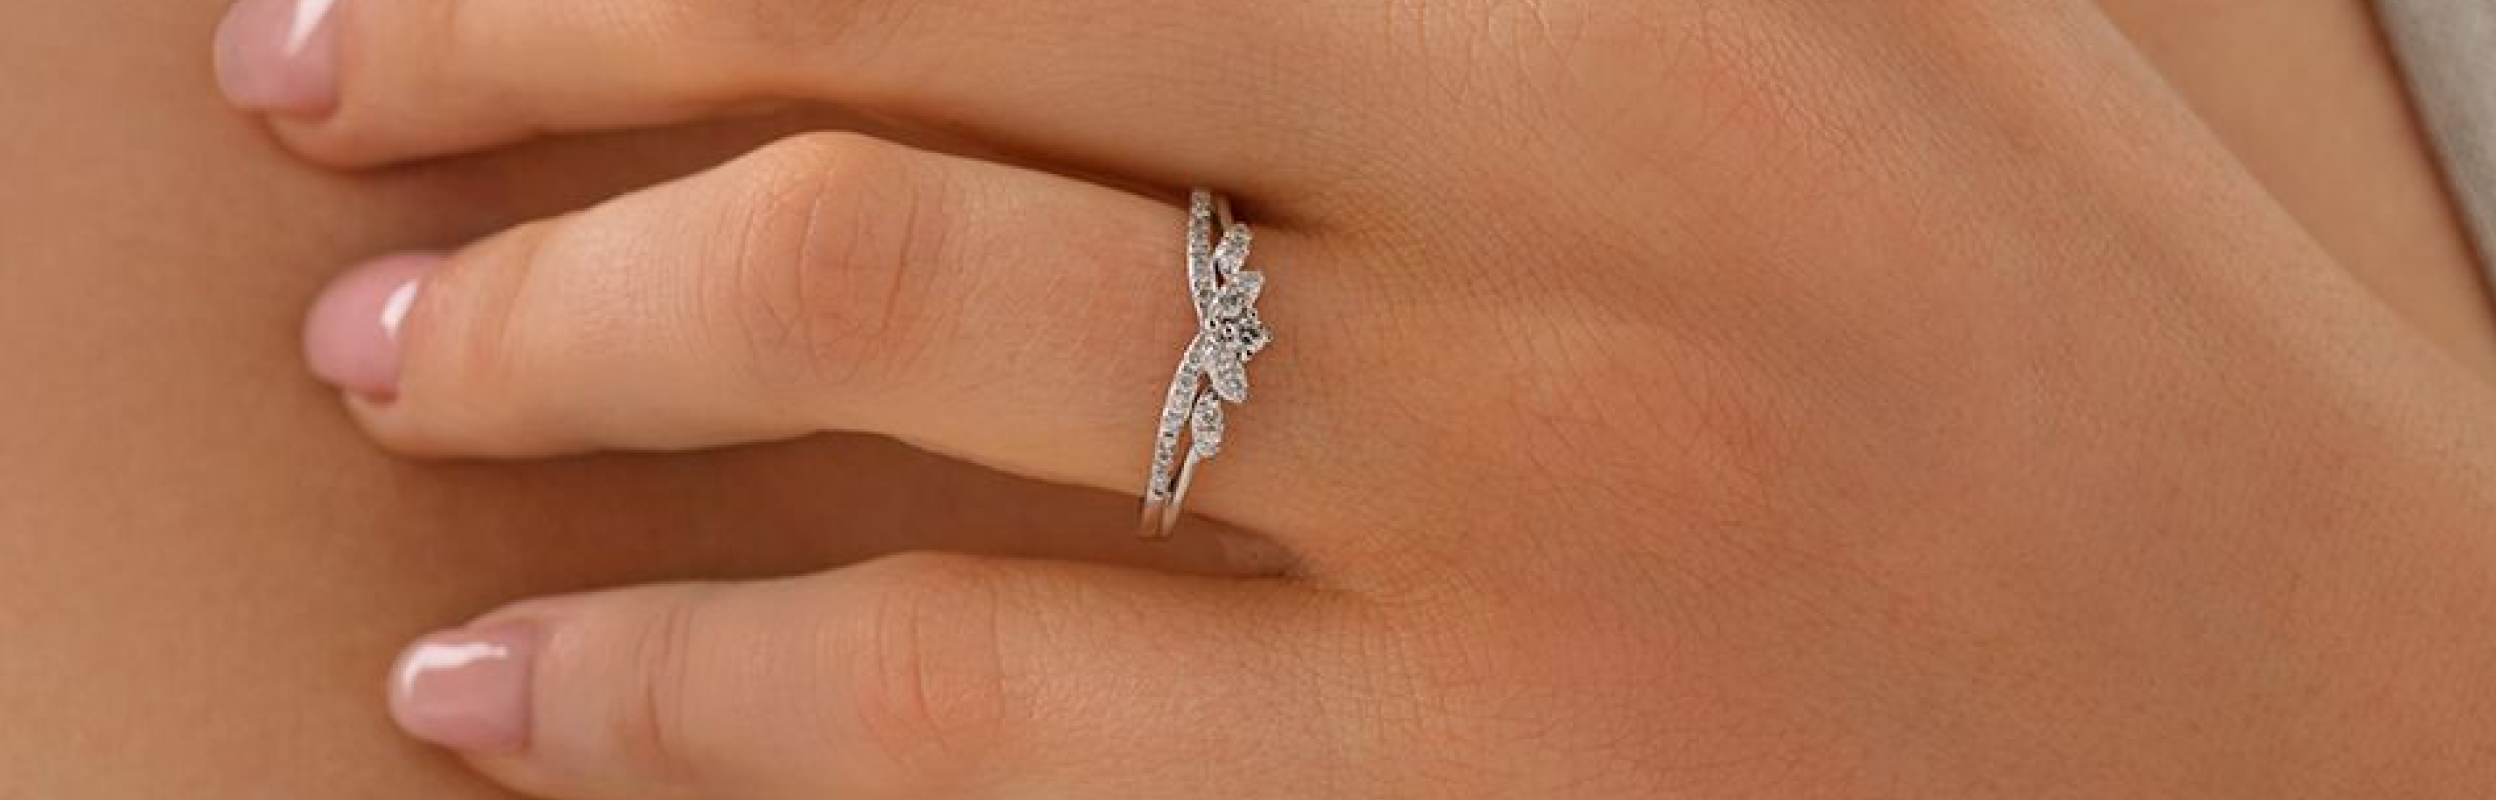 white gold vintage inspired engagement ring on womans hand